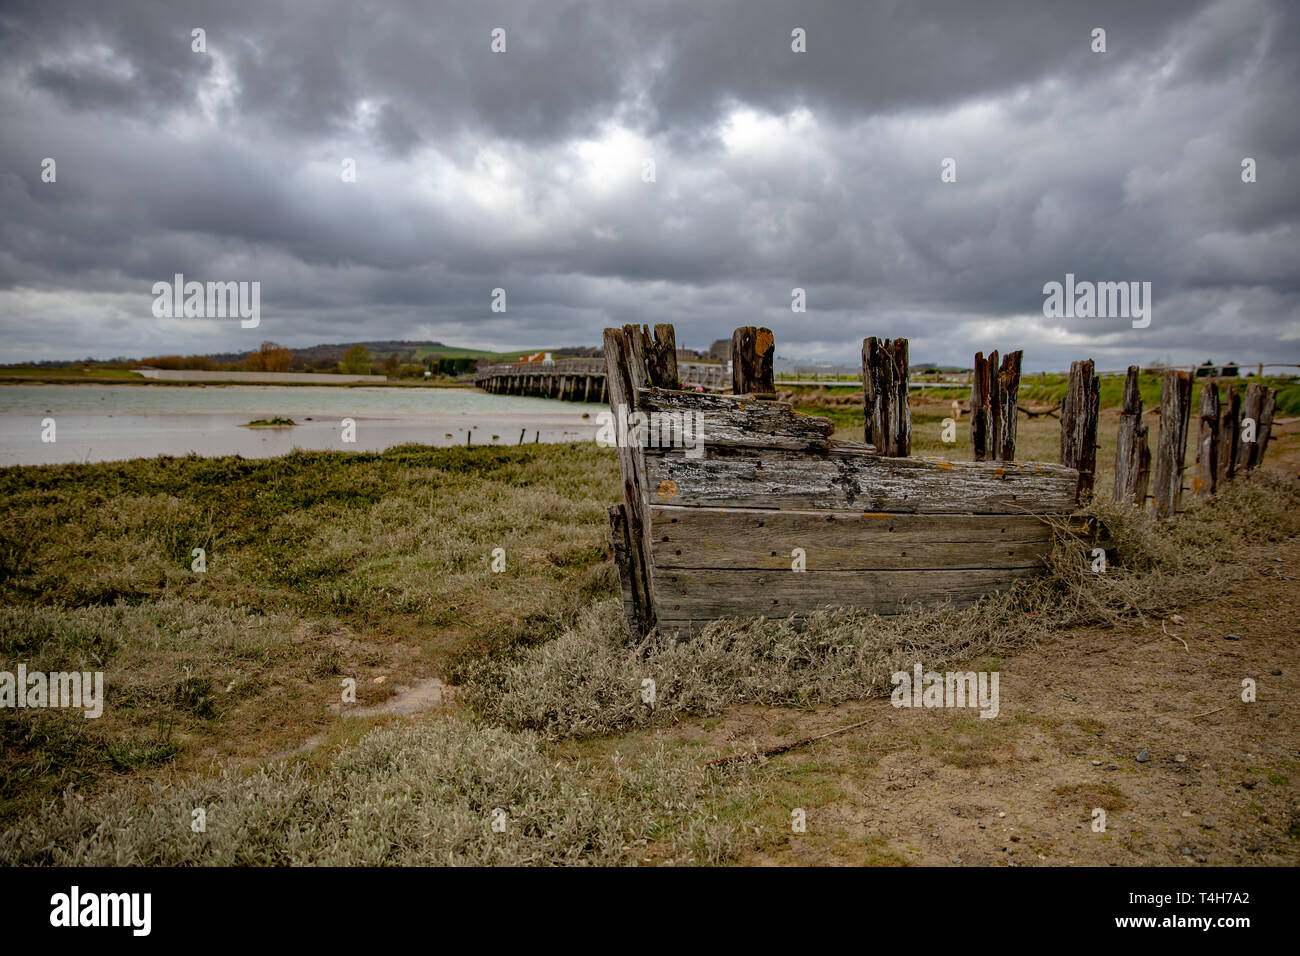 Wrecked wooden boat on the banks of the River Adur. Shoreham-by-Sea, Sussex. Stock Photo